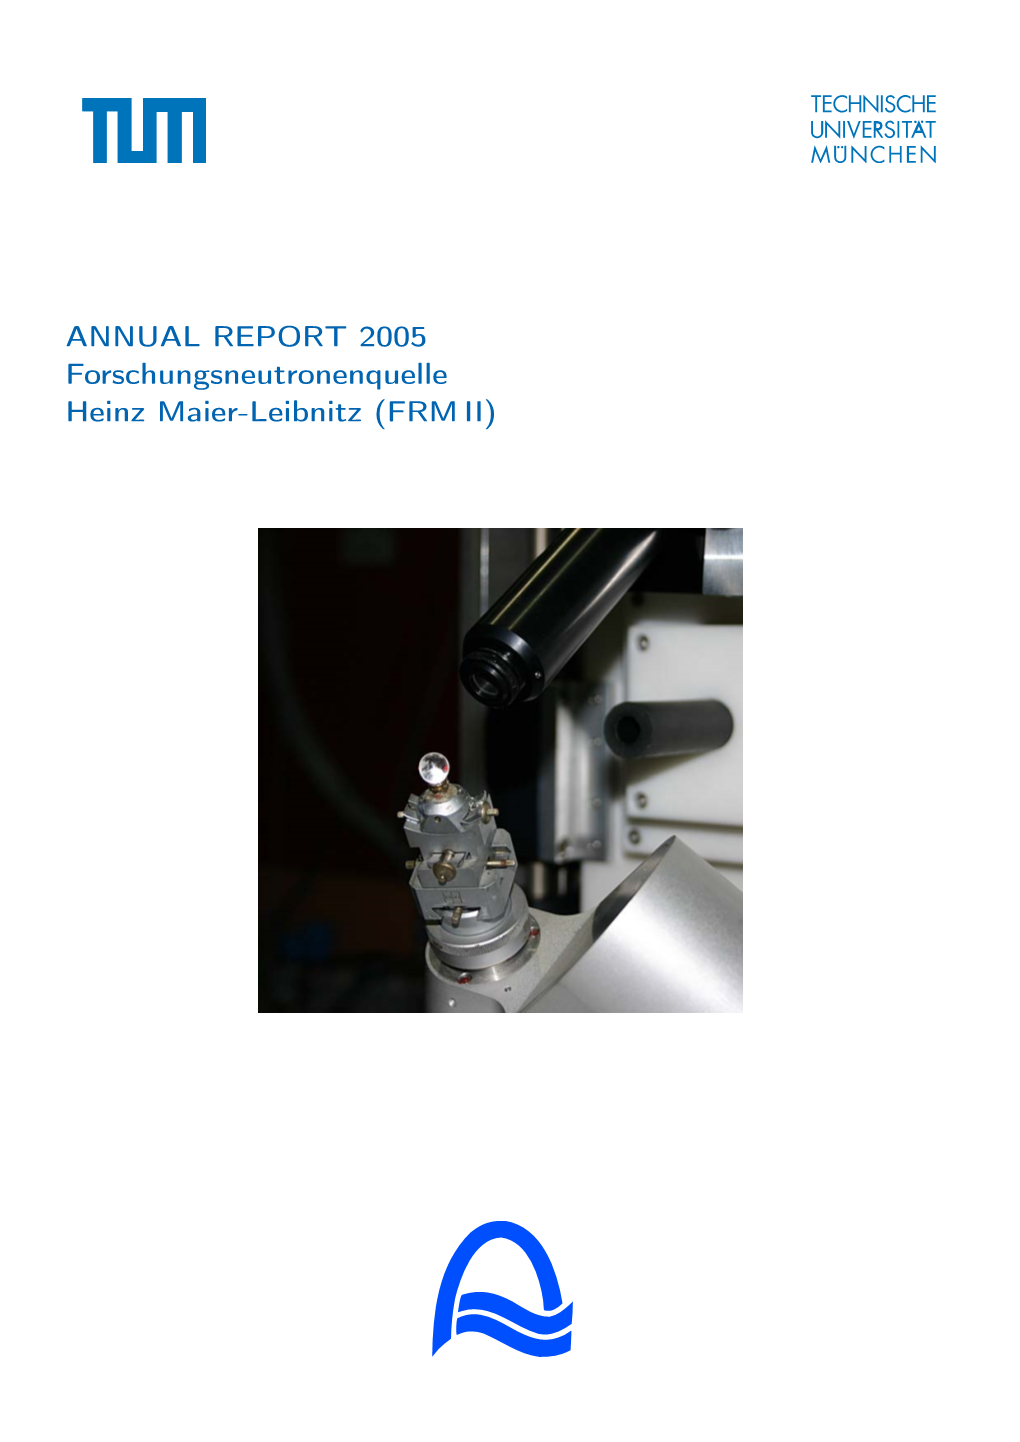 ANNUAL REPORT 2005 Forschungsneutronenquelle Heinz Maier-Leibnitz (FRM II) Cover Image: Quartz Test Sample at the Single Crystal Diffractometer RESI Contents Iii